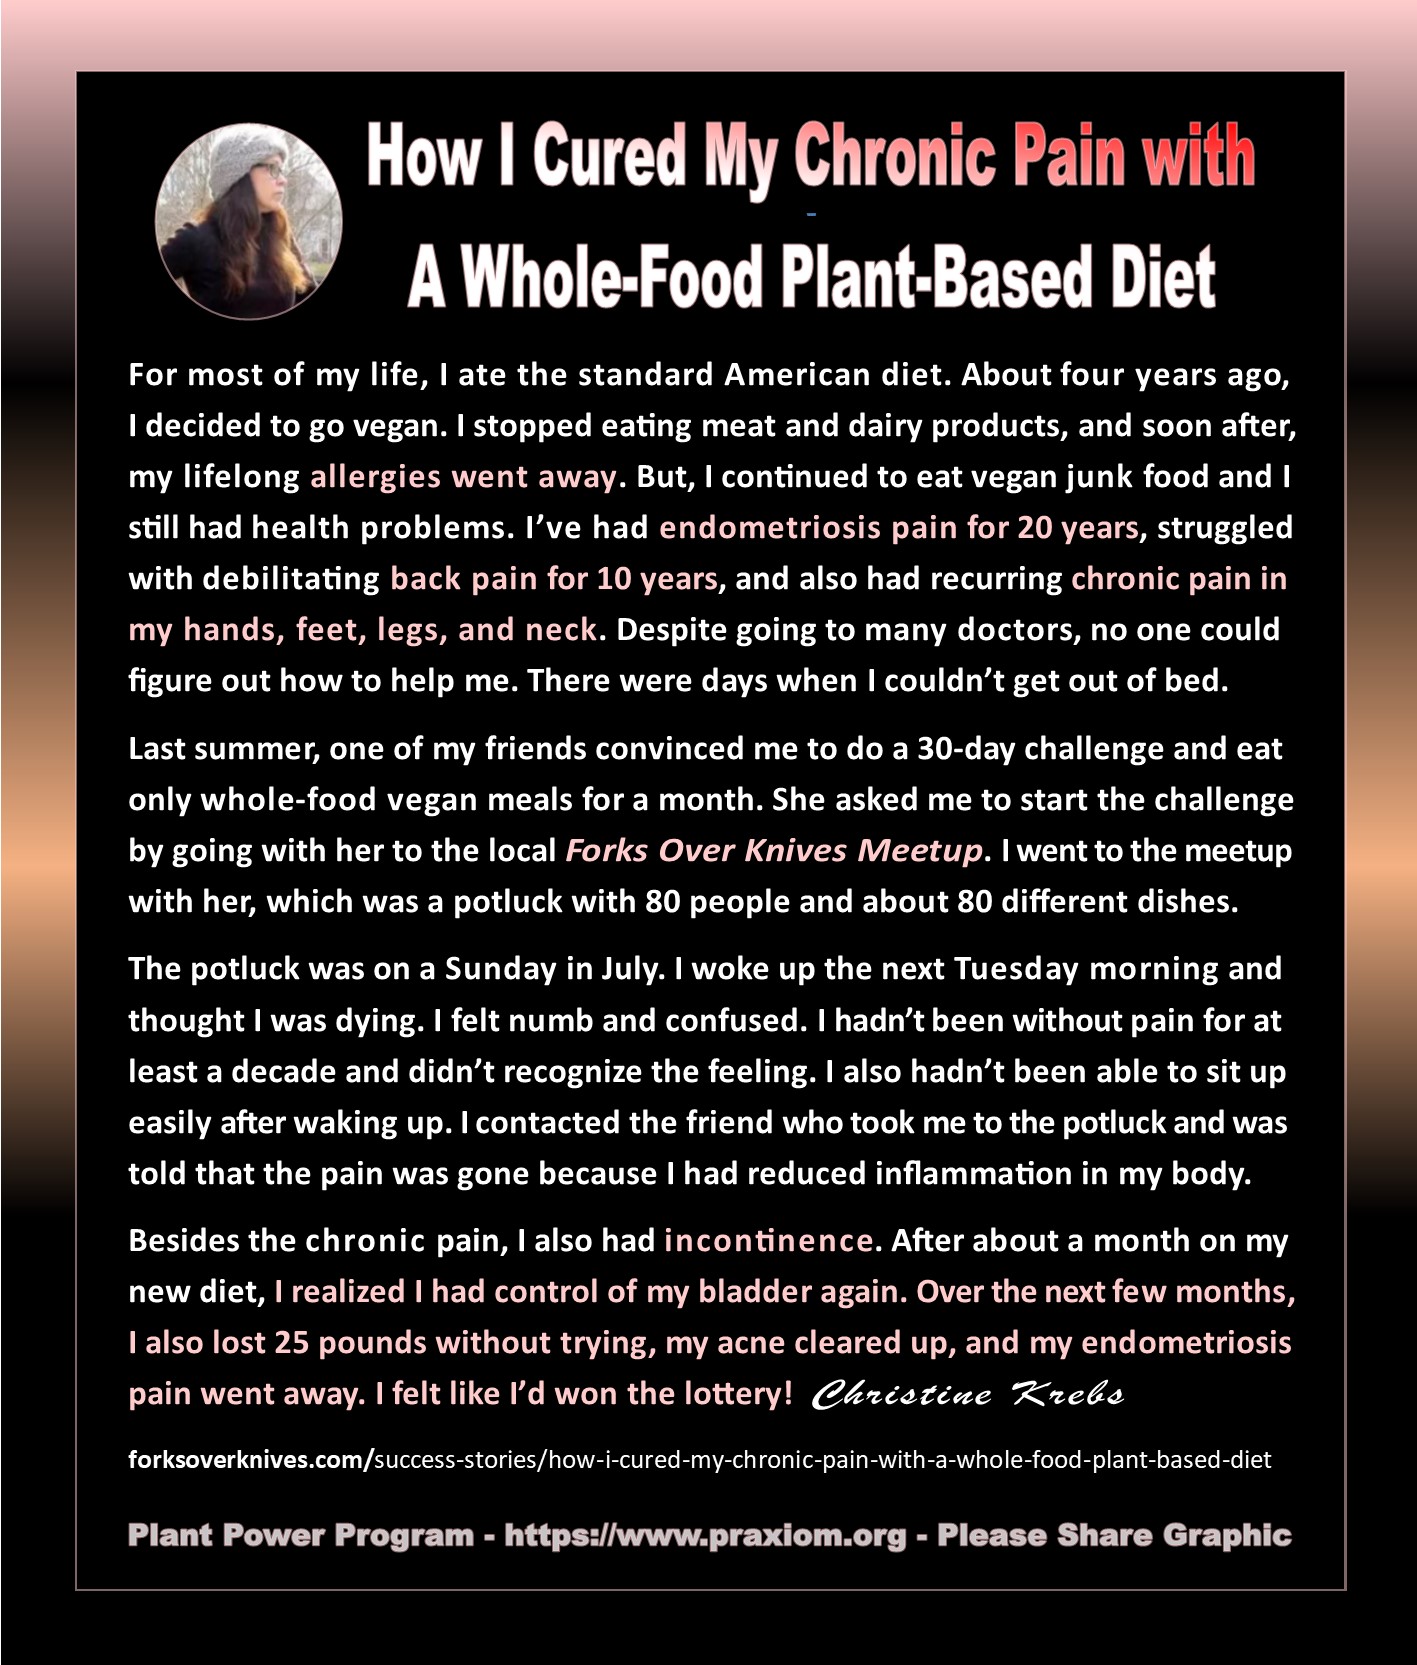 How I Cured My Chronic Pain with a Whole Food Plant Based Diet - Christine Krebs